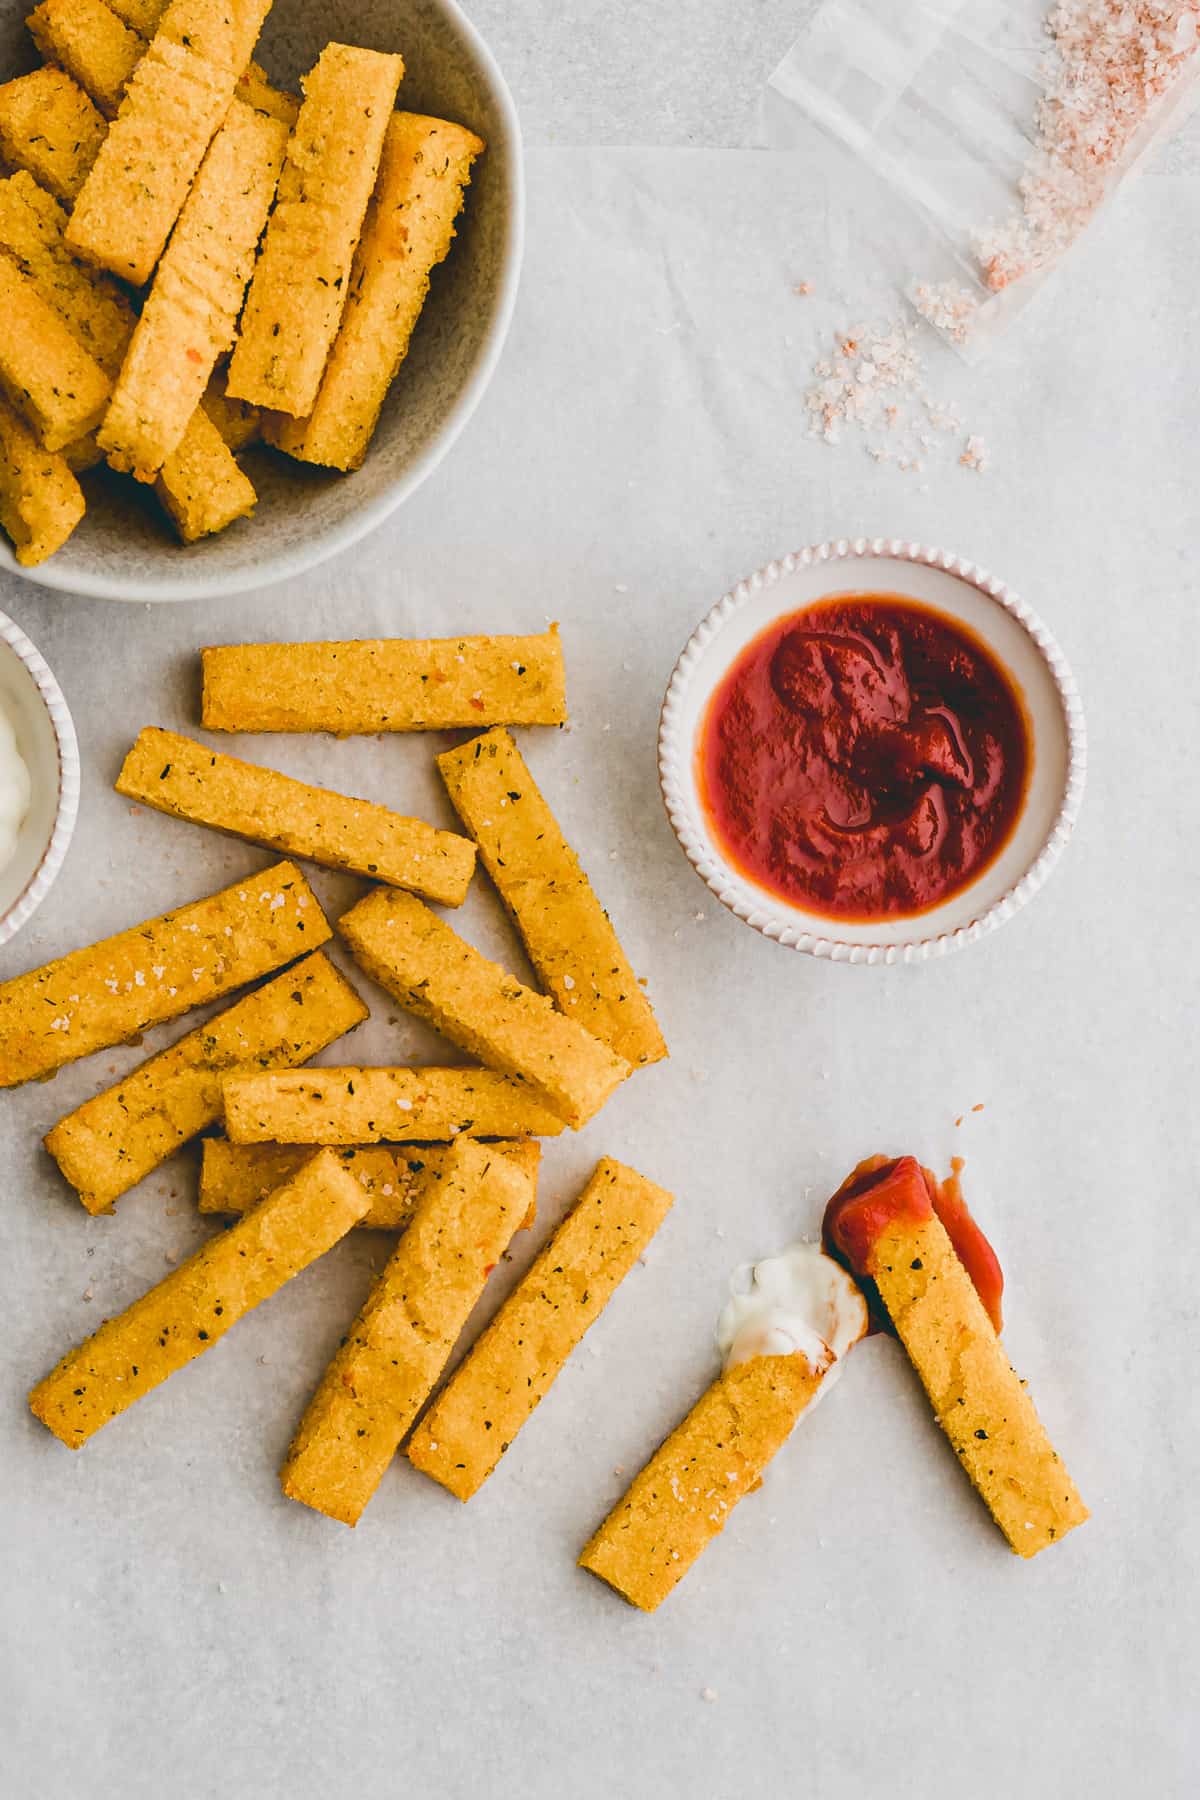 baked polenta fries next to a small bowl with ketchup